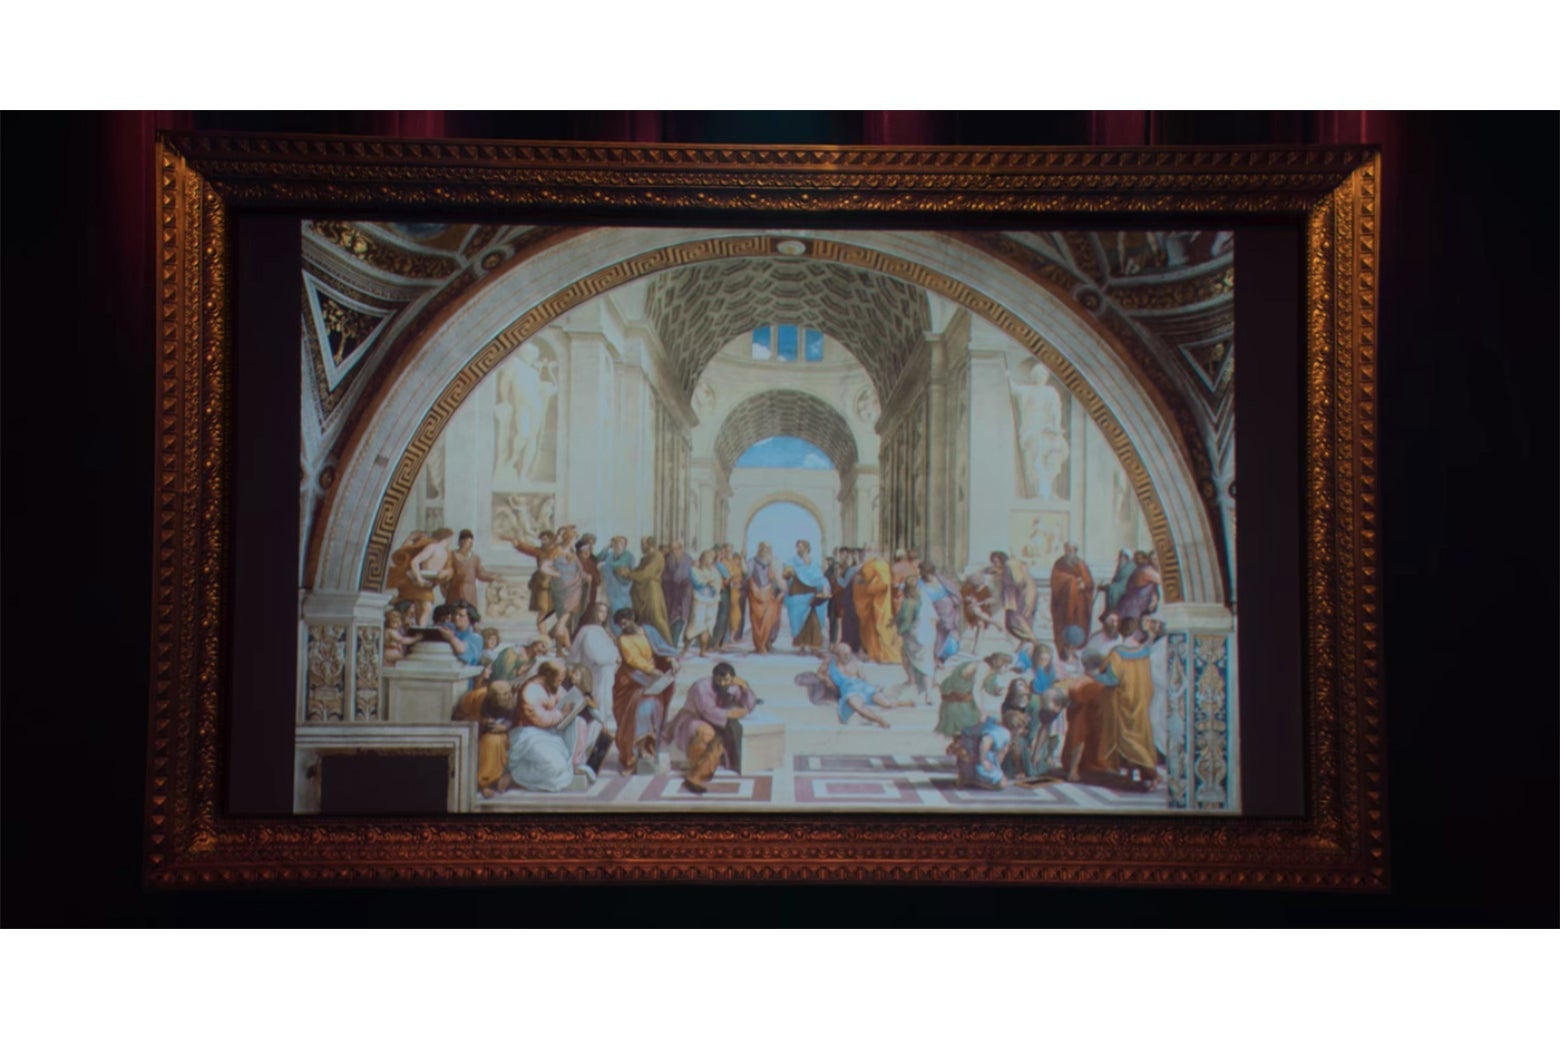 A close-up of Hannah Gadsby's projection screen from Douglas, showing Raphael's The School of Athens.